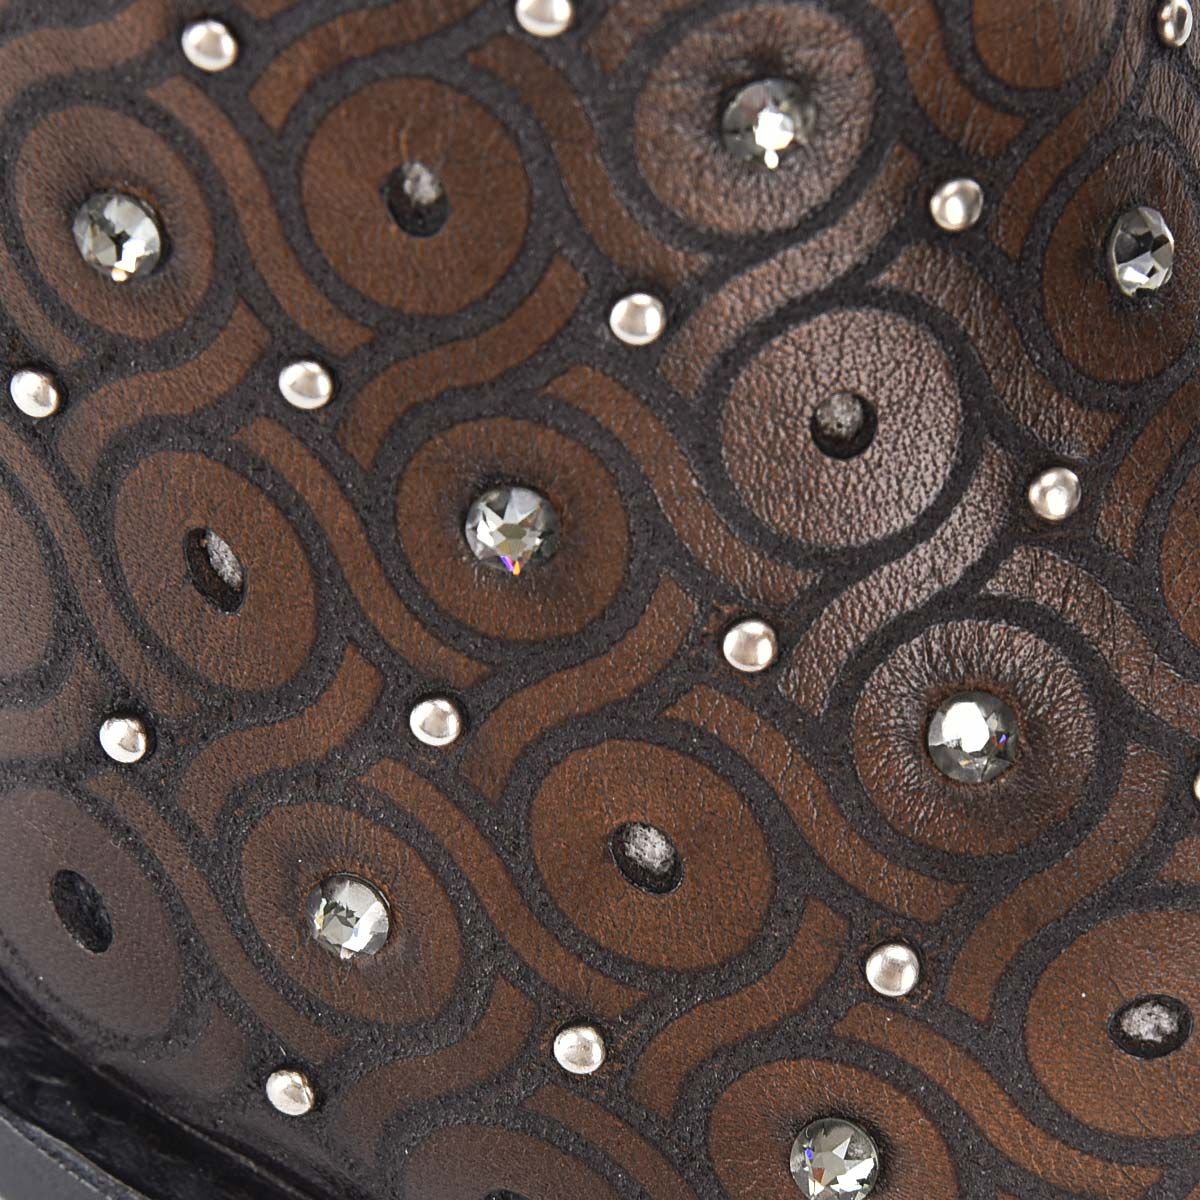 Dark brown tall boot with austrian crystals detail